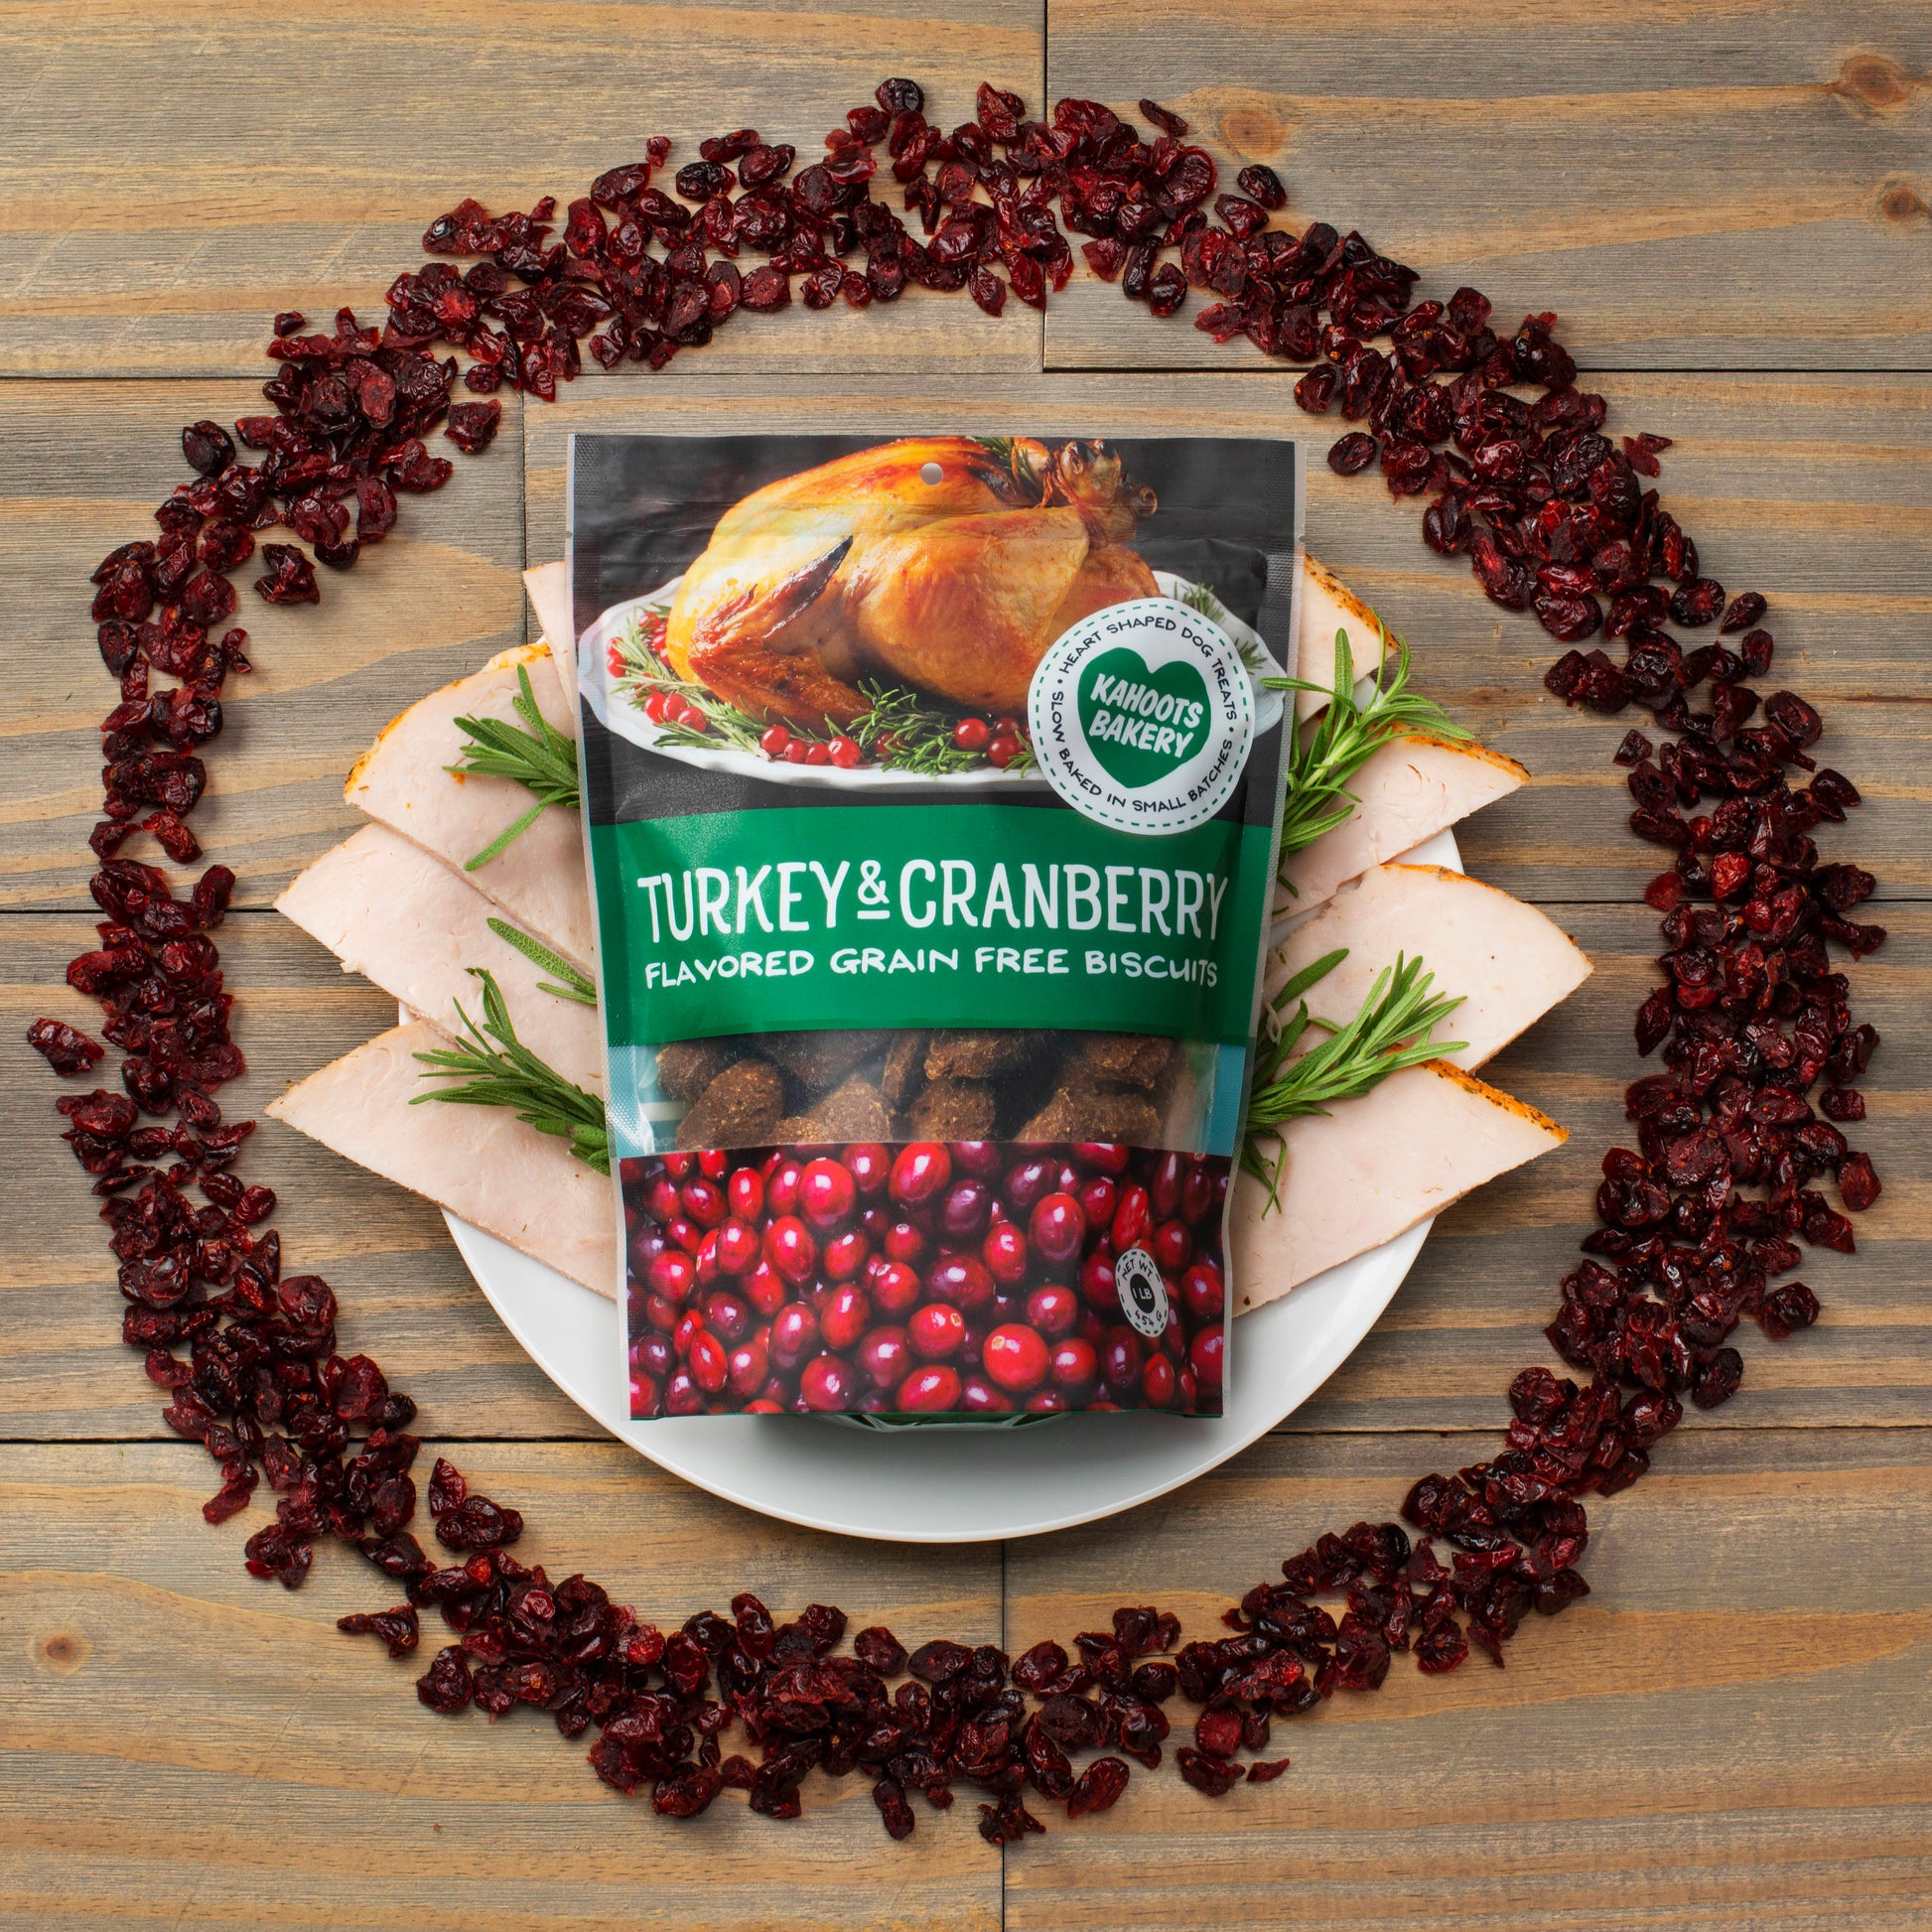 Turkey and cranberry biscuit packaging near ingredients